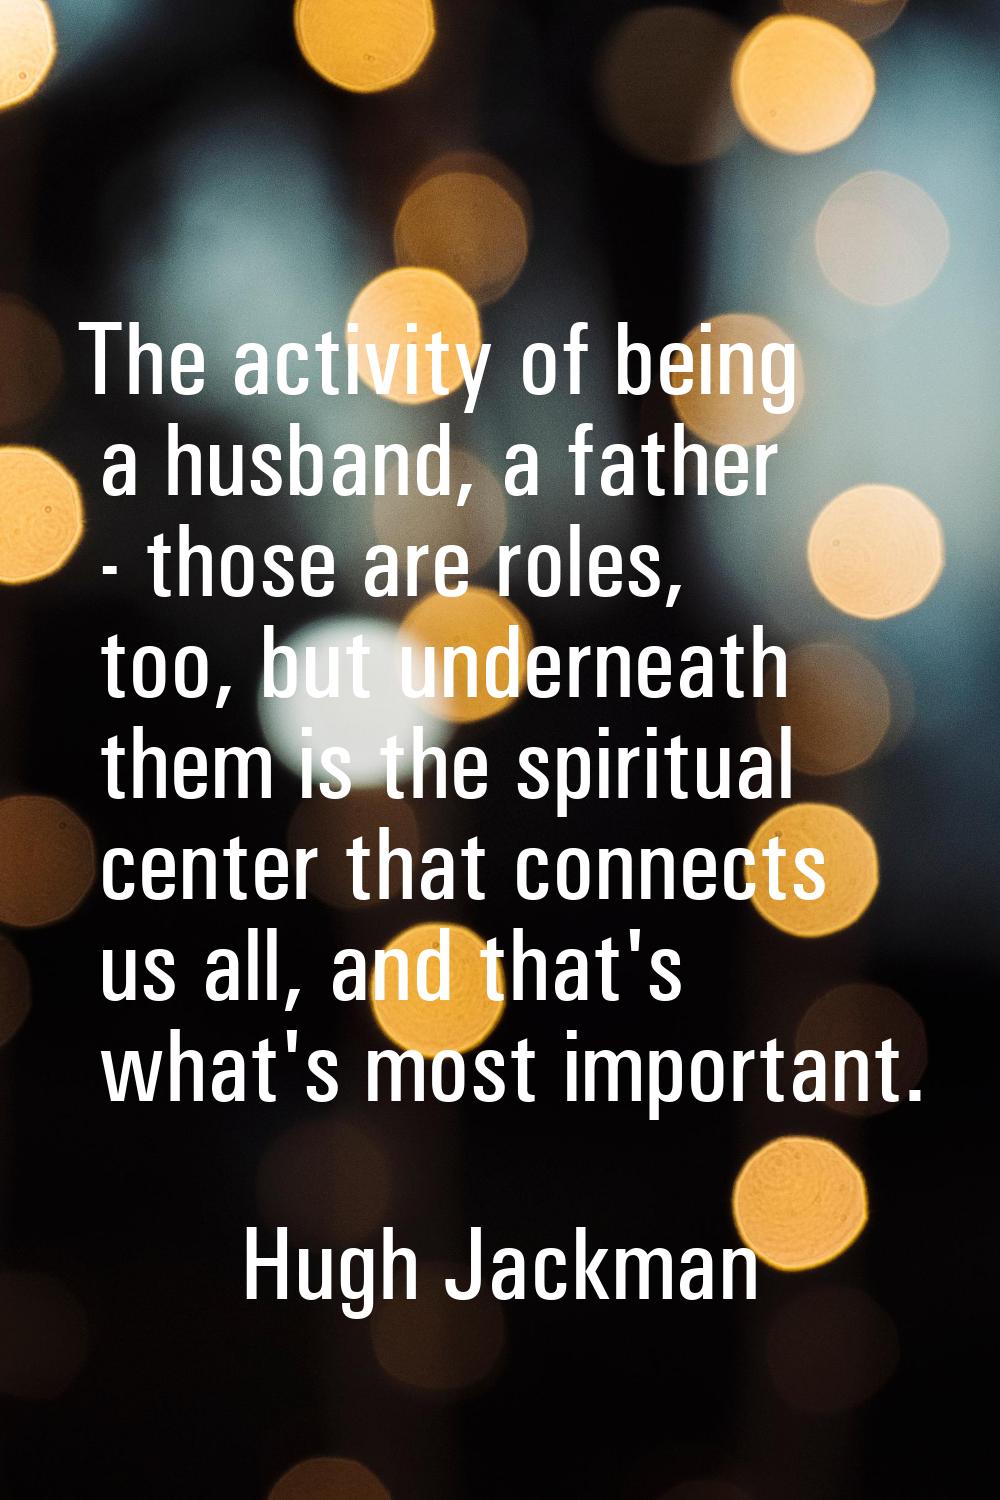 The activity of being a husband, a father - those are roles, too, but underneath them is the spirit